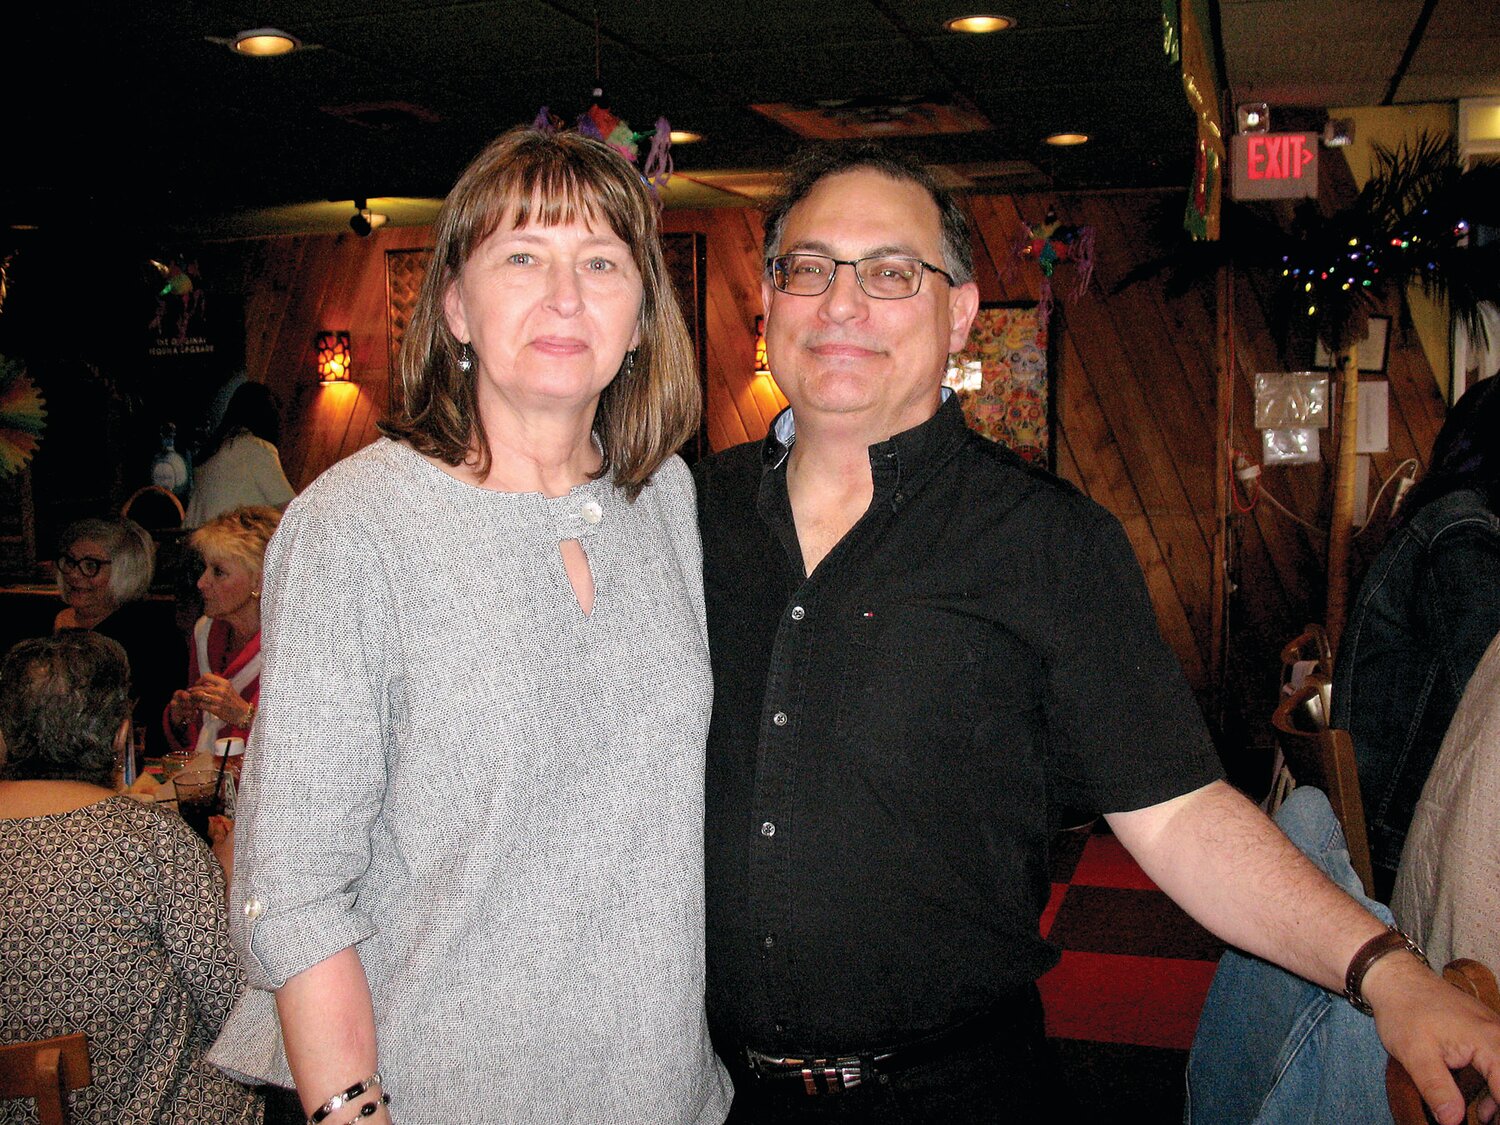 Bill D'Anjolell and his wife, Karen, at his 65th birthday celebration.